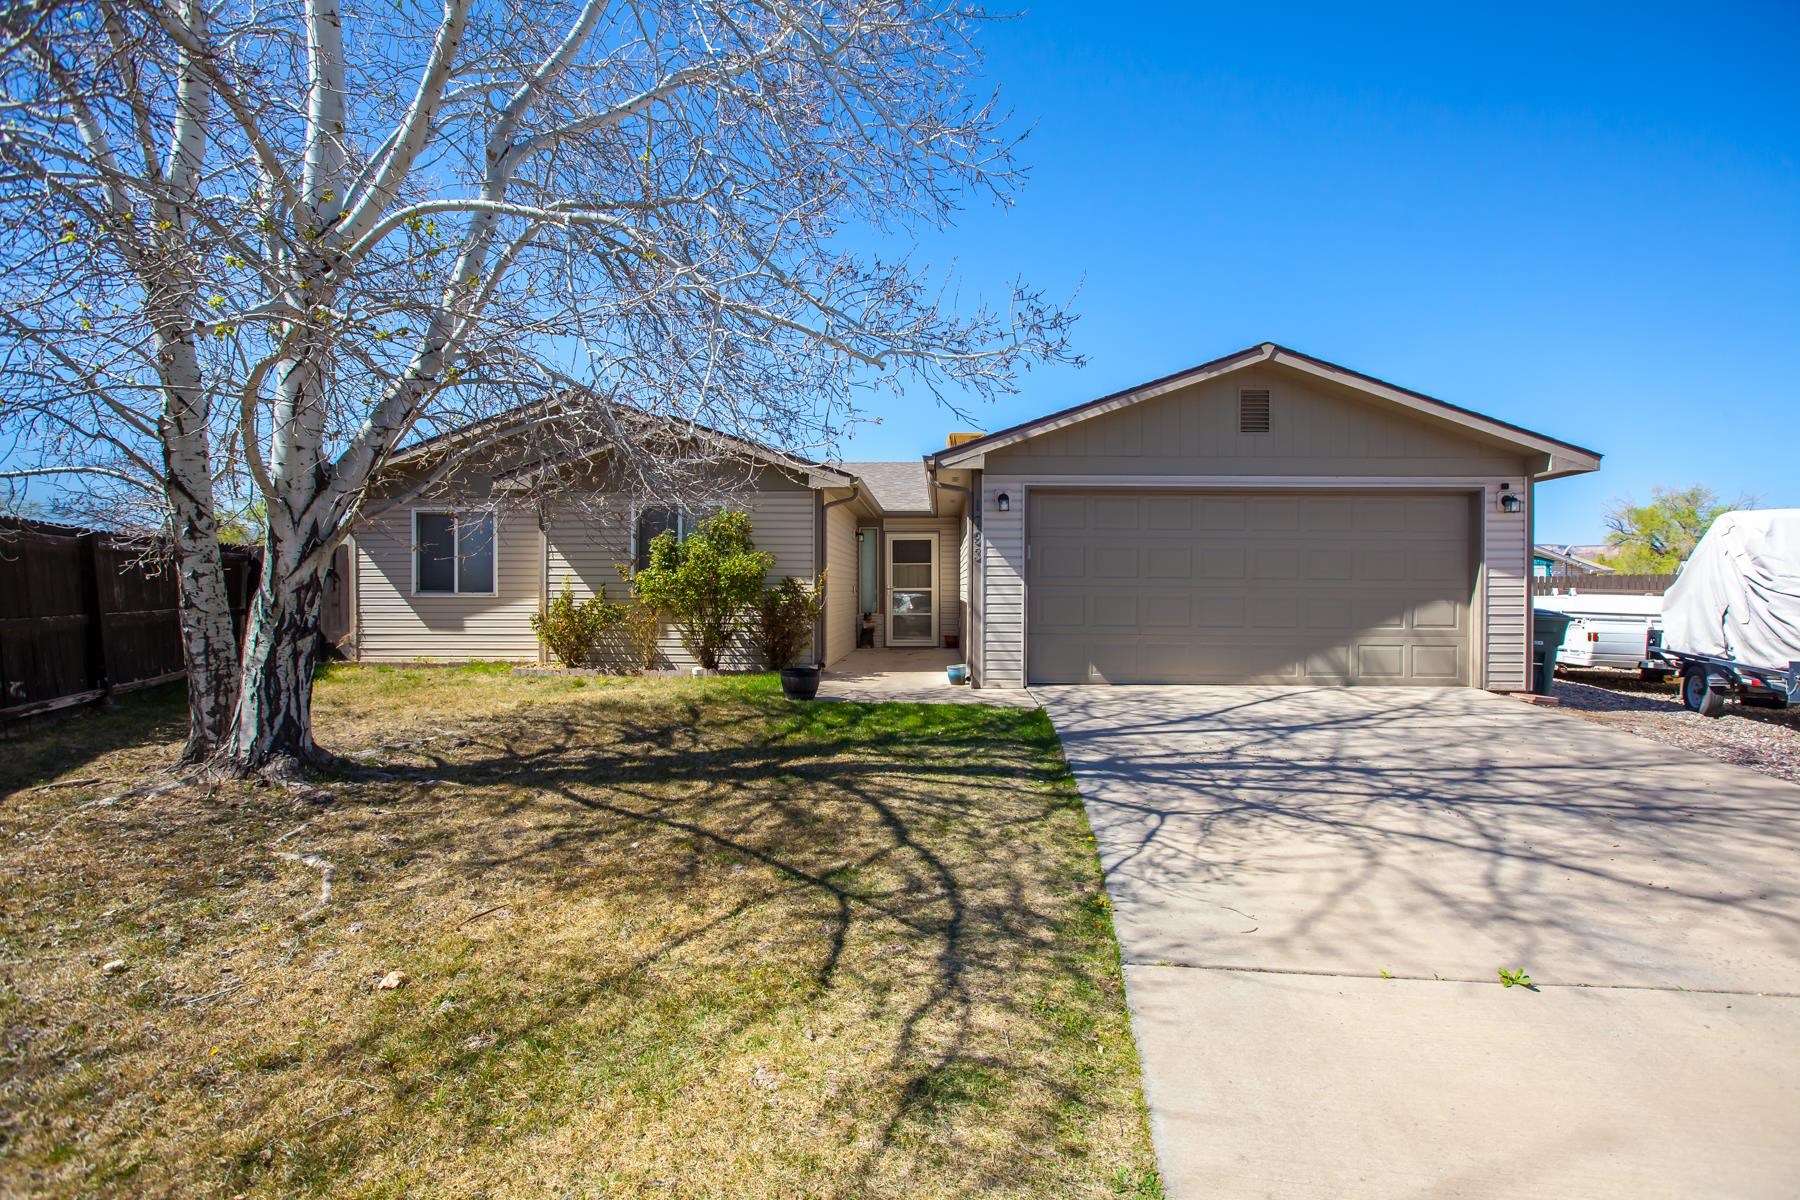 Welcome home to this 3-bed, 2-bath ranch-style home in Orchard Mesa offers split bedrooms, an open concept, and a spacious backyard in a quiet cul-de-sac. No HOA, Newer hot water heater, newer boiler, and a 2-car garage. The backyard is perfect for gatherings and relaxation. Schedule a showing today!